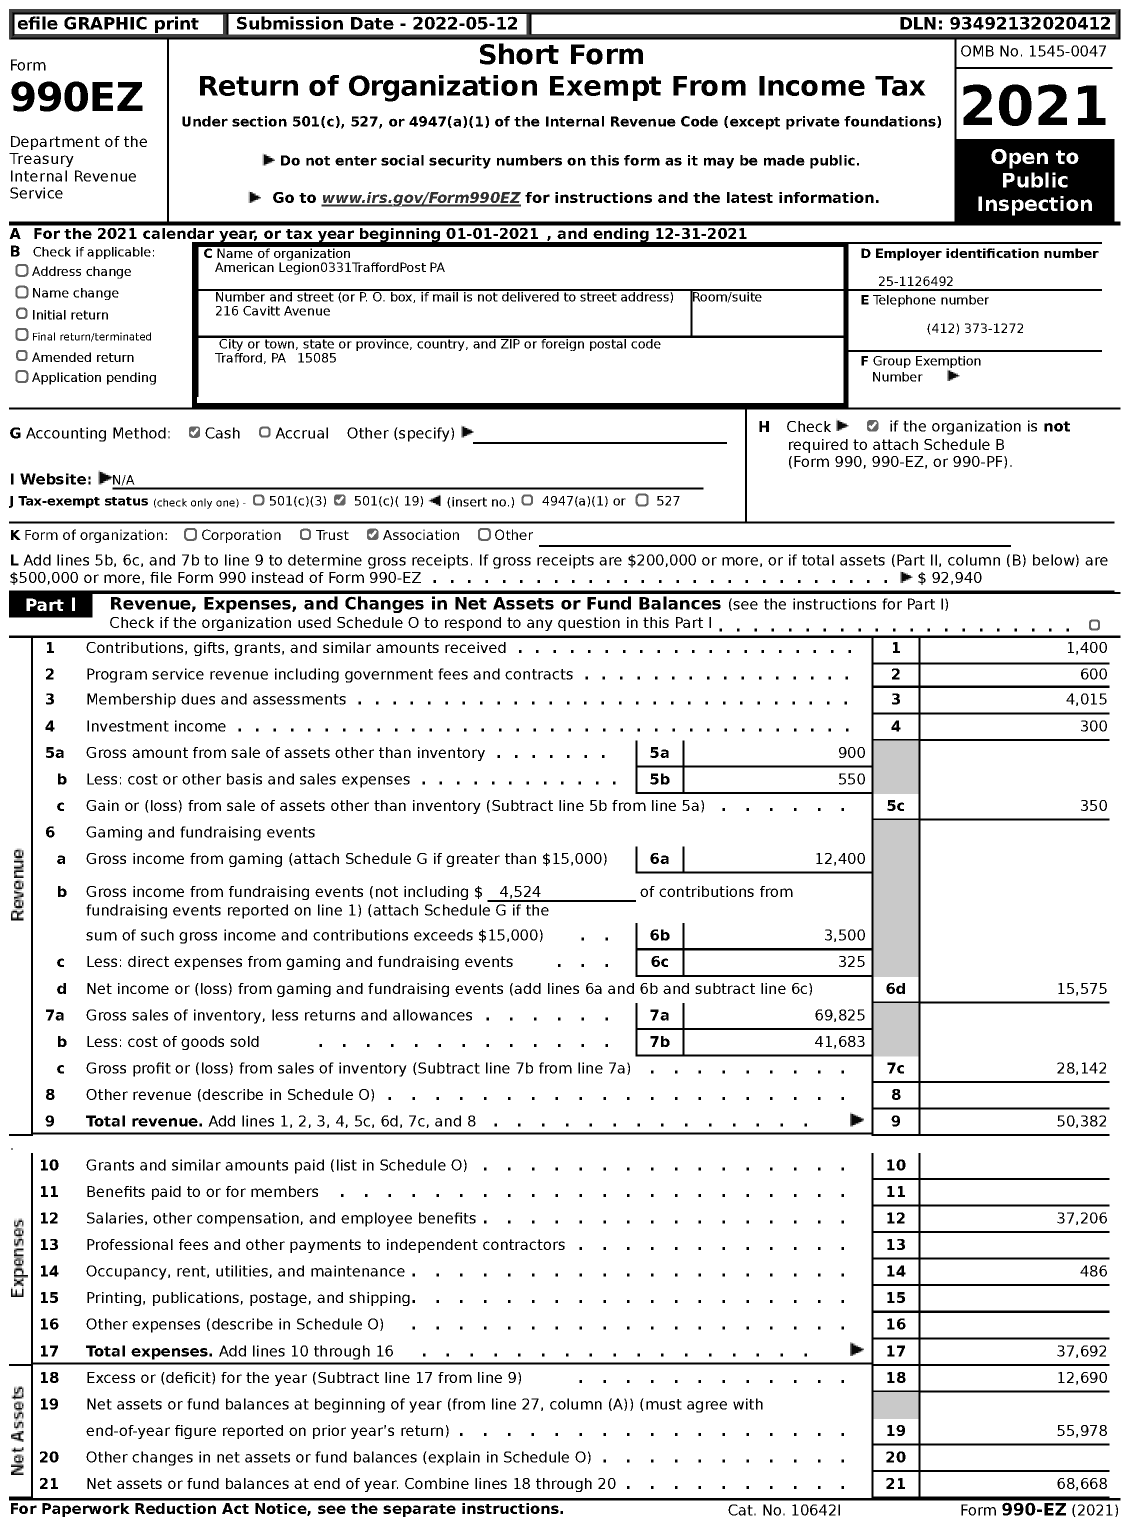 Image of first page of 2021 Form 990EZ for American Legion - 0331 Trafford Post PA